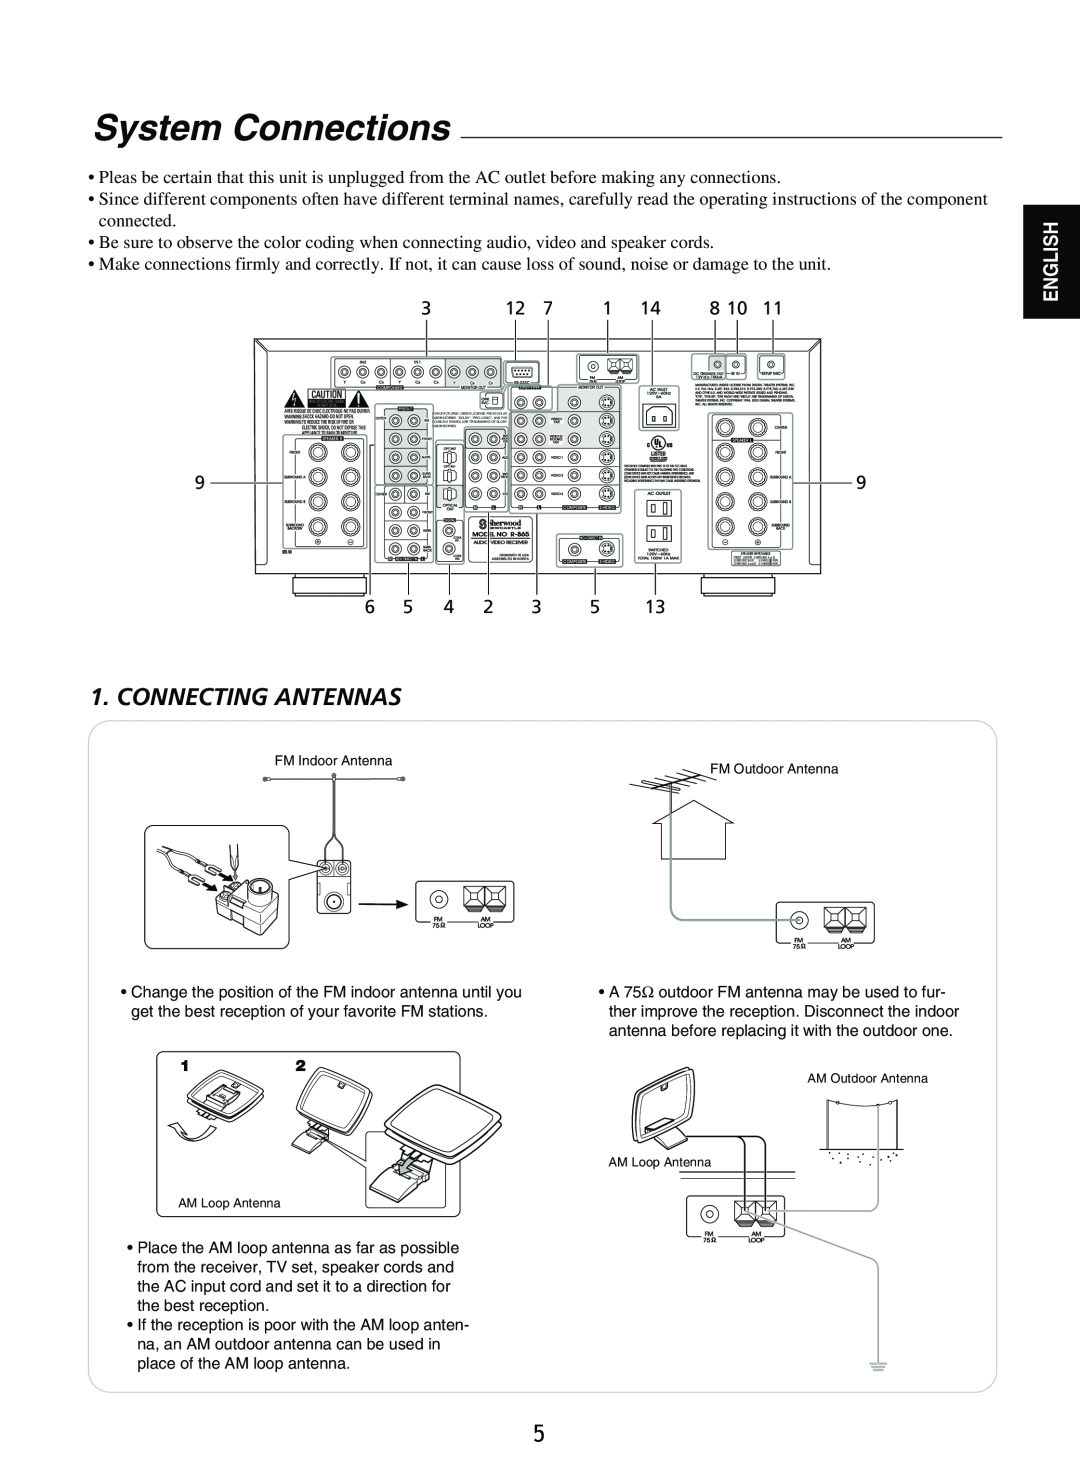 Sherwood R-865 manual System Connections, Connecting Antennas, English 